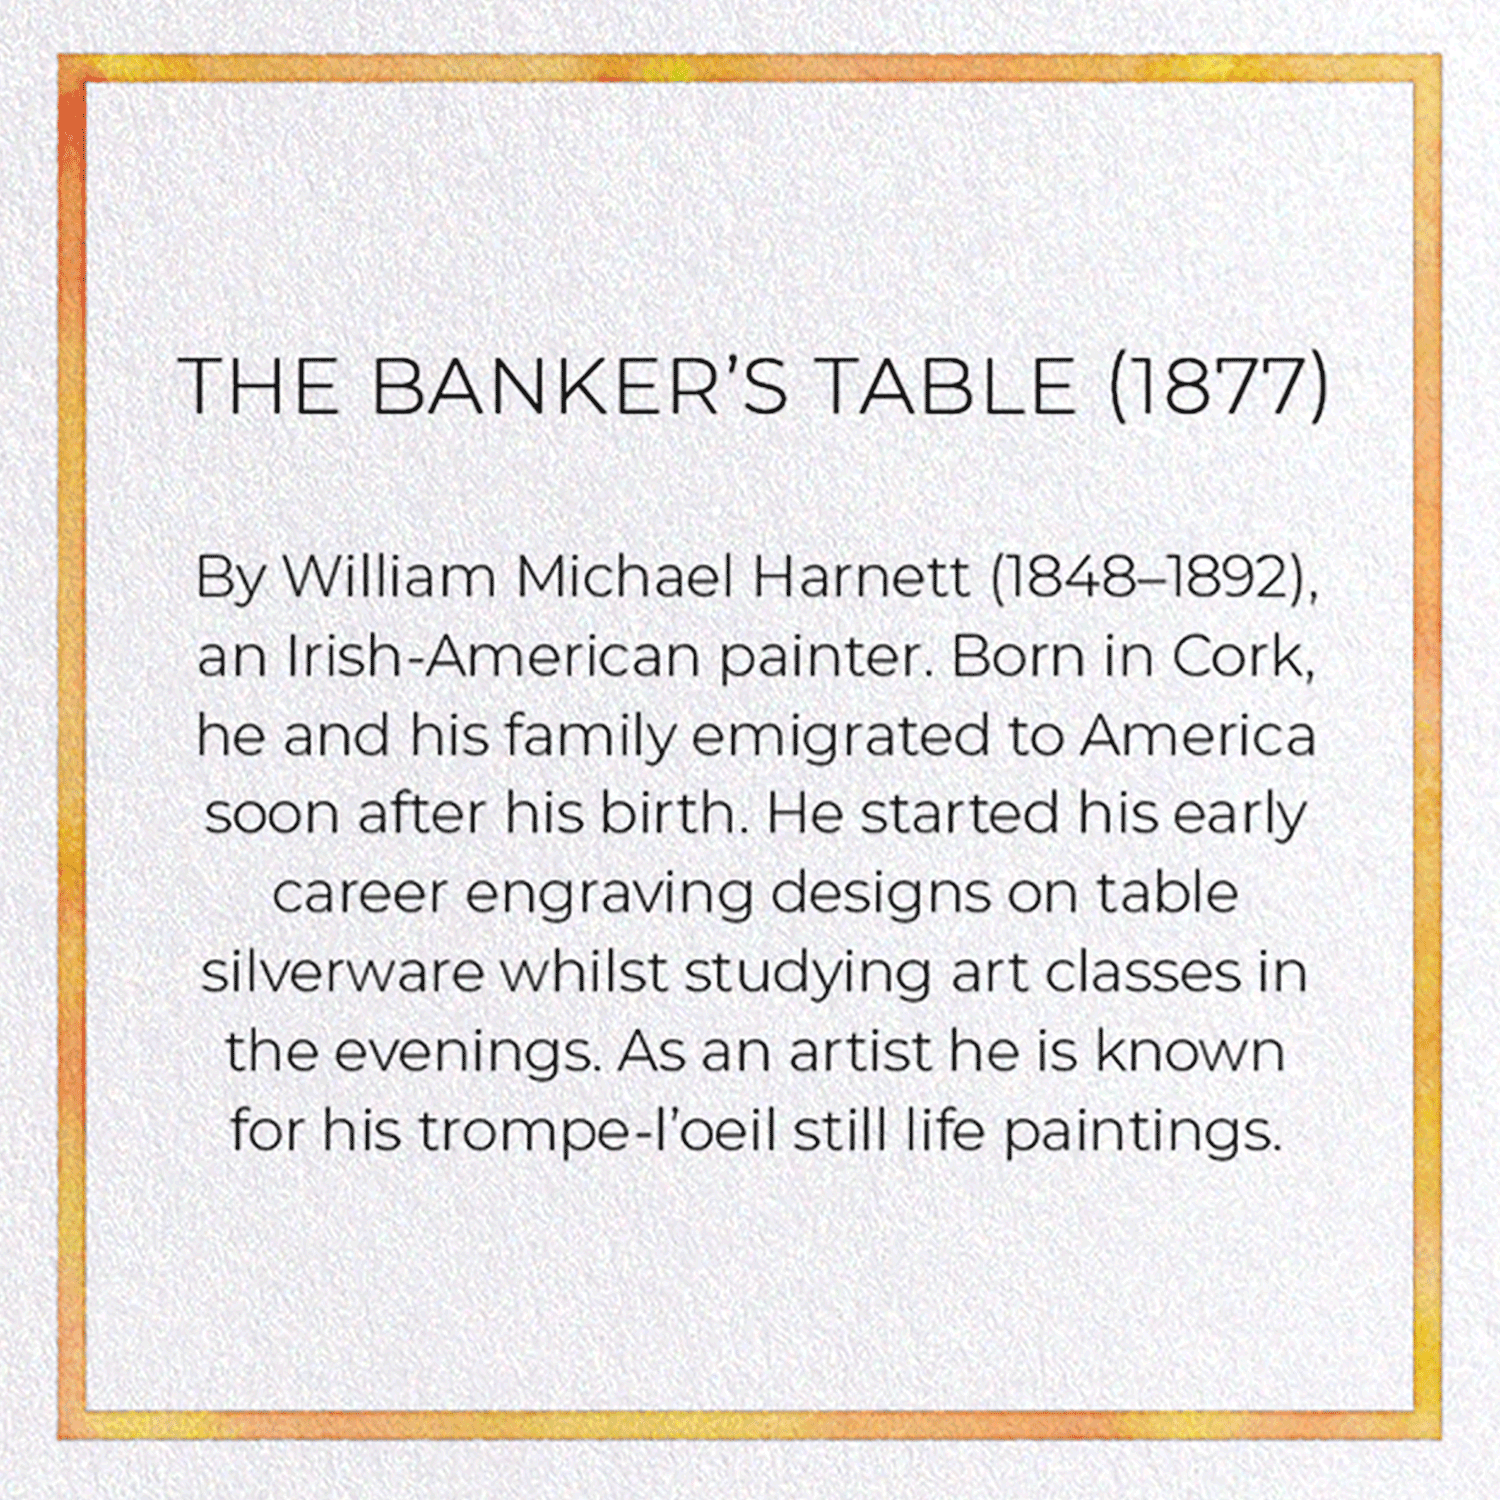 THE BANKER’S TABLE (1877)